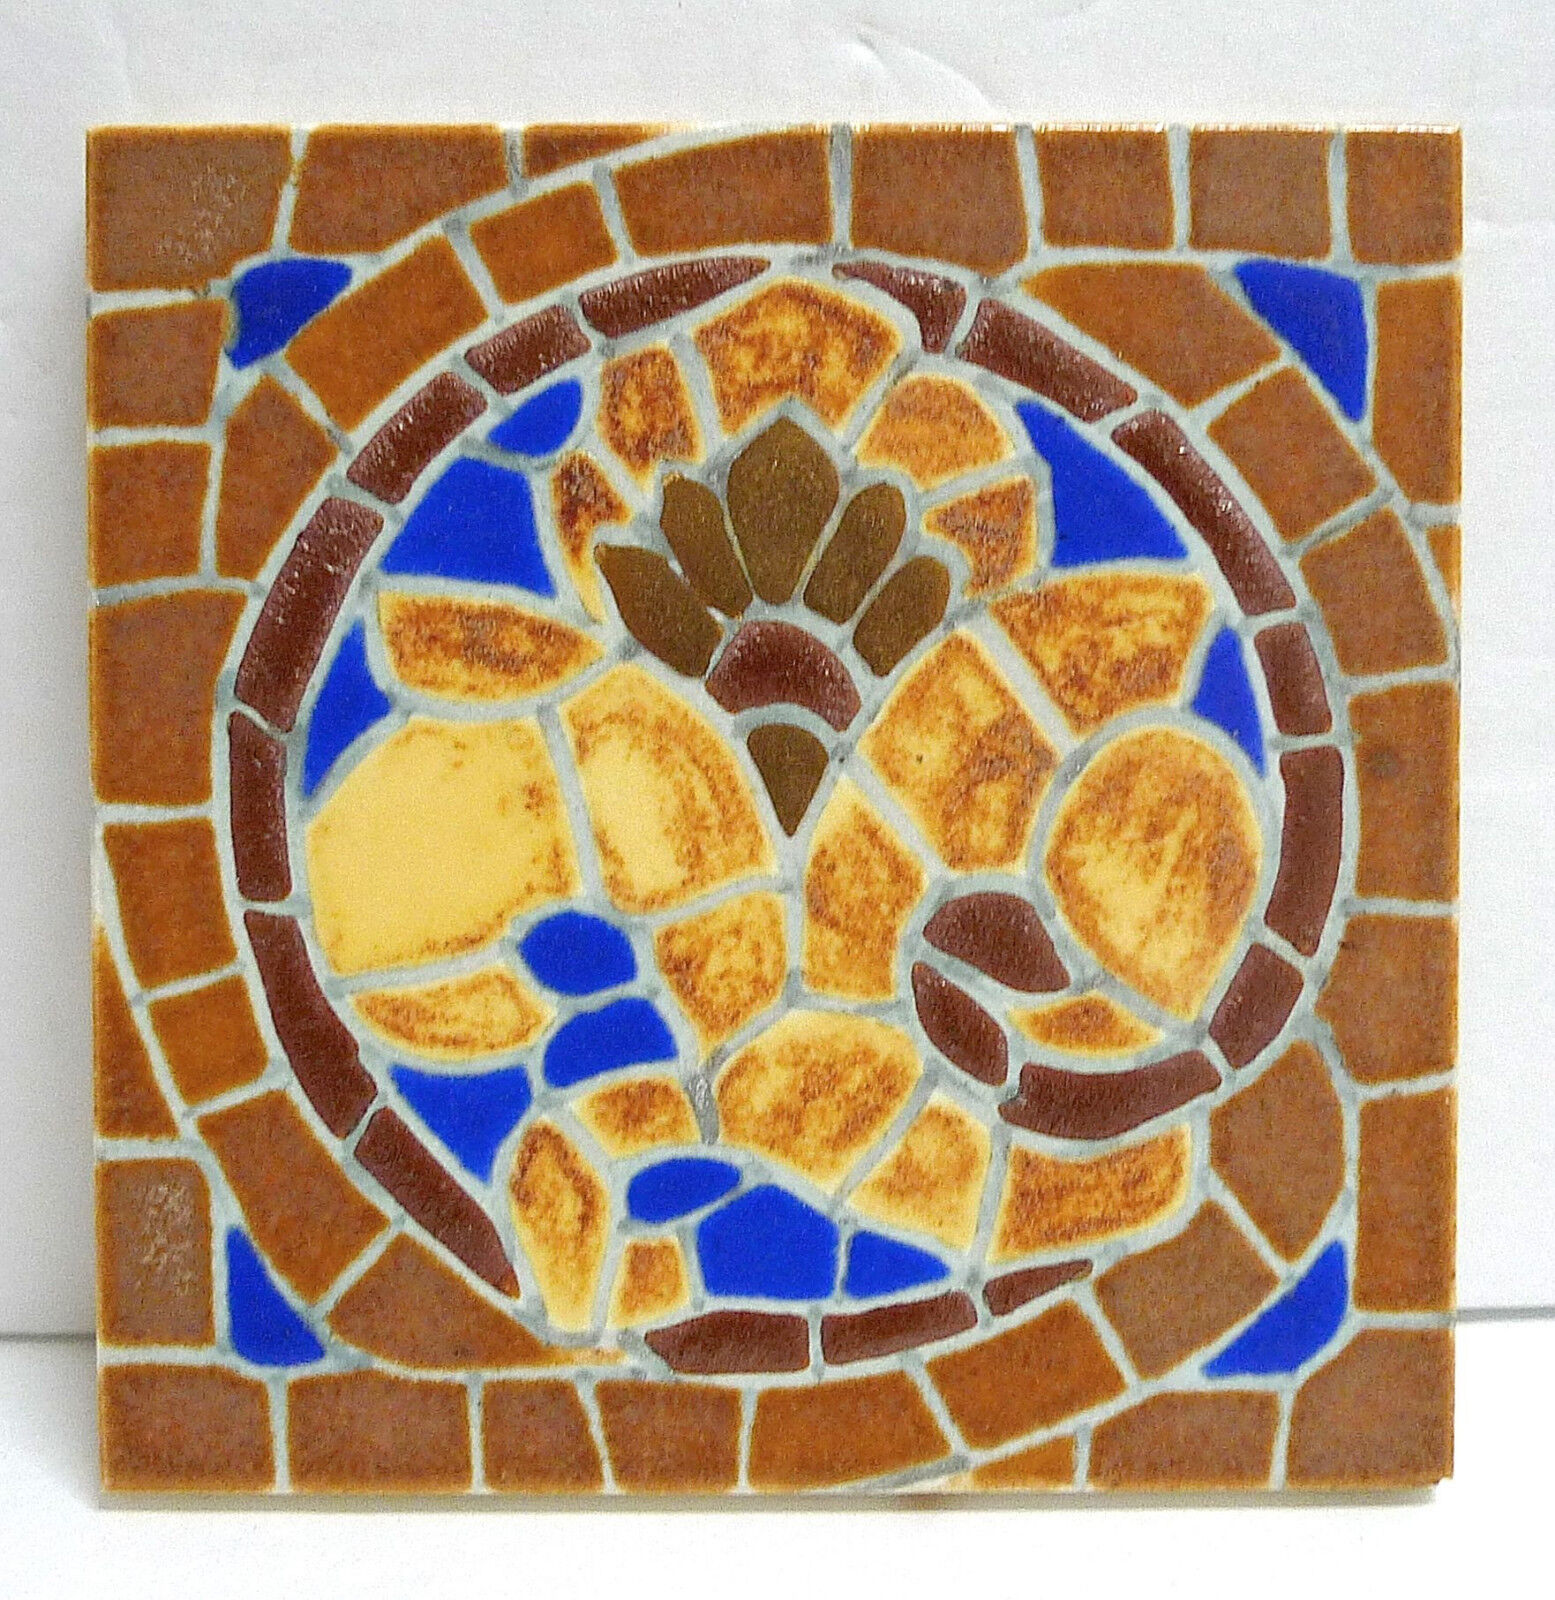 AETCO LA Vintage Decorated Tile with Gold Glazing American Encaustic